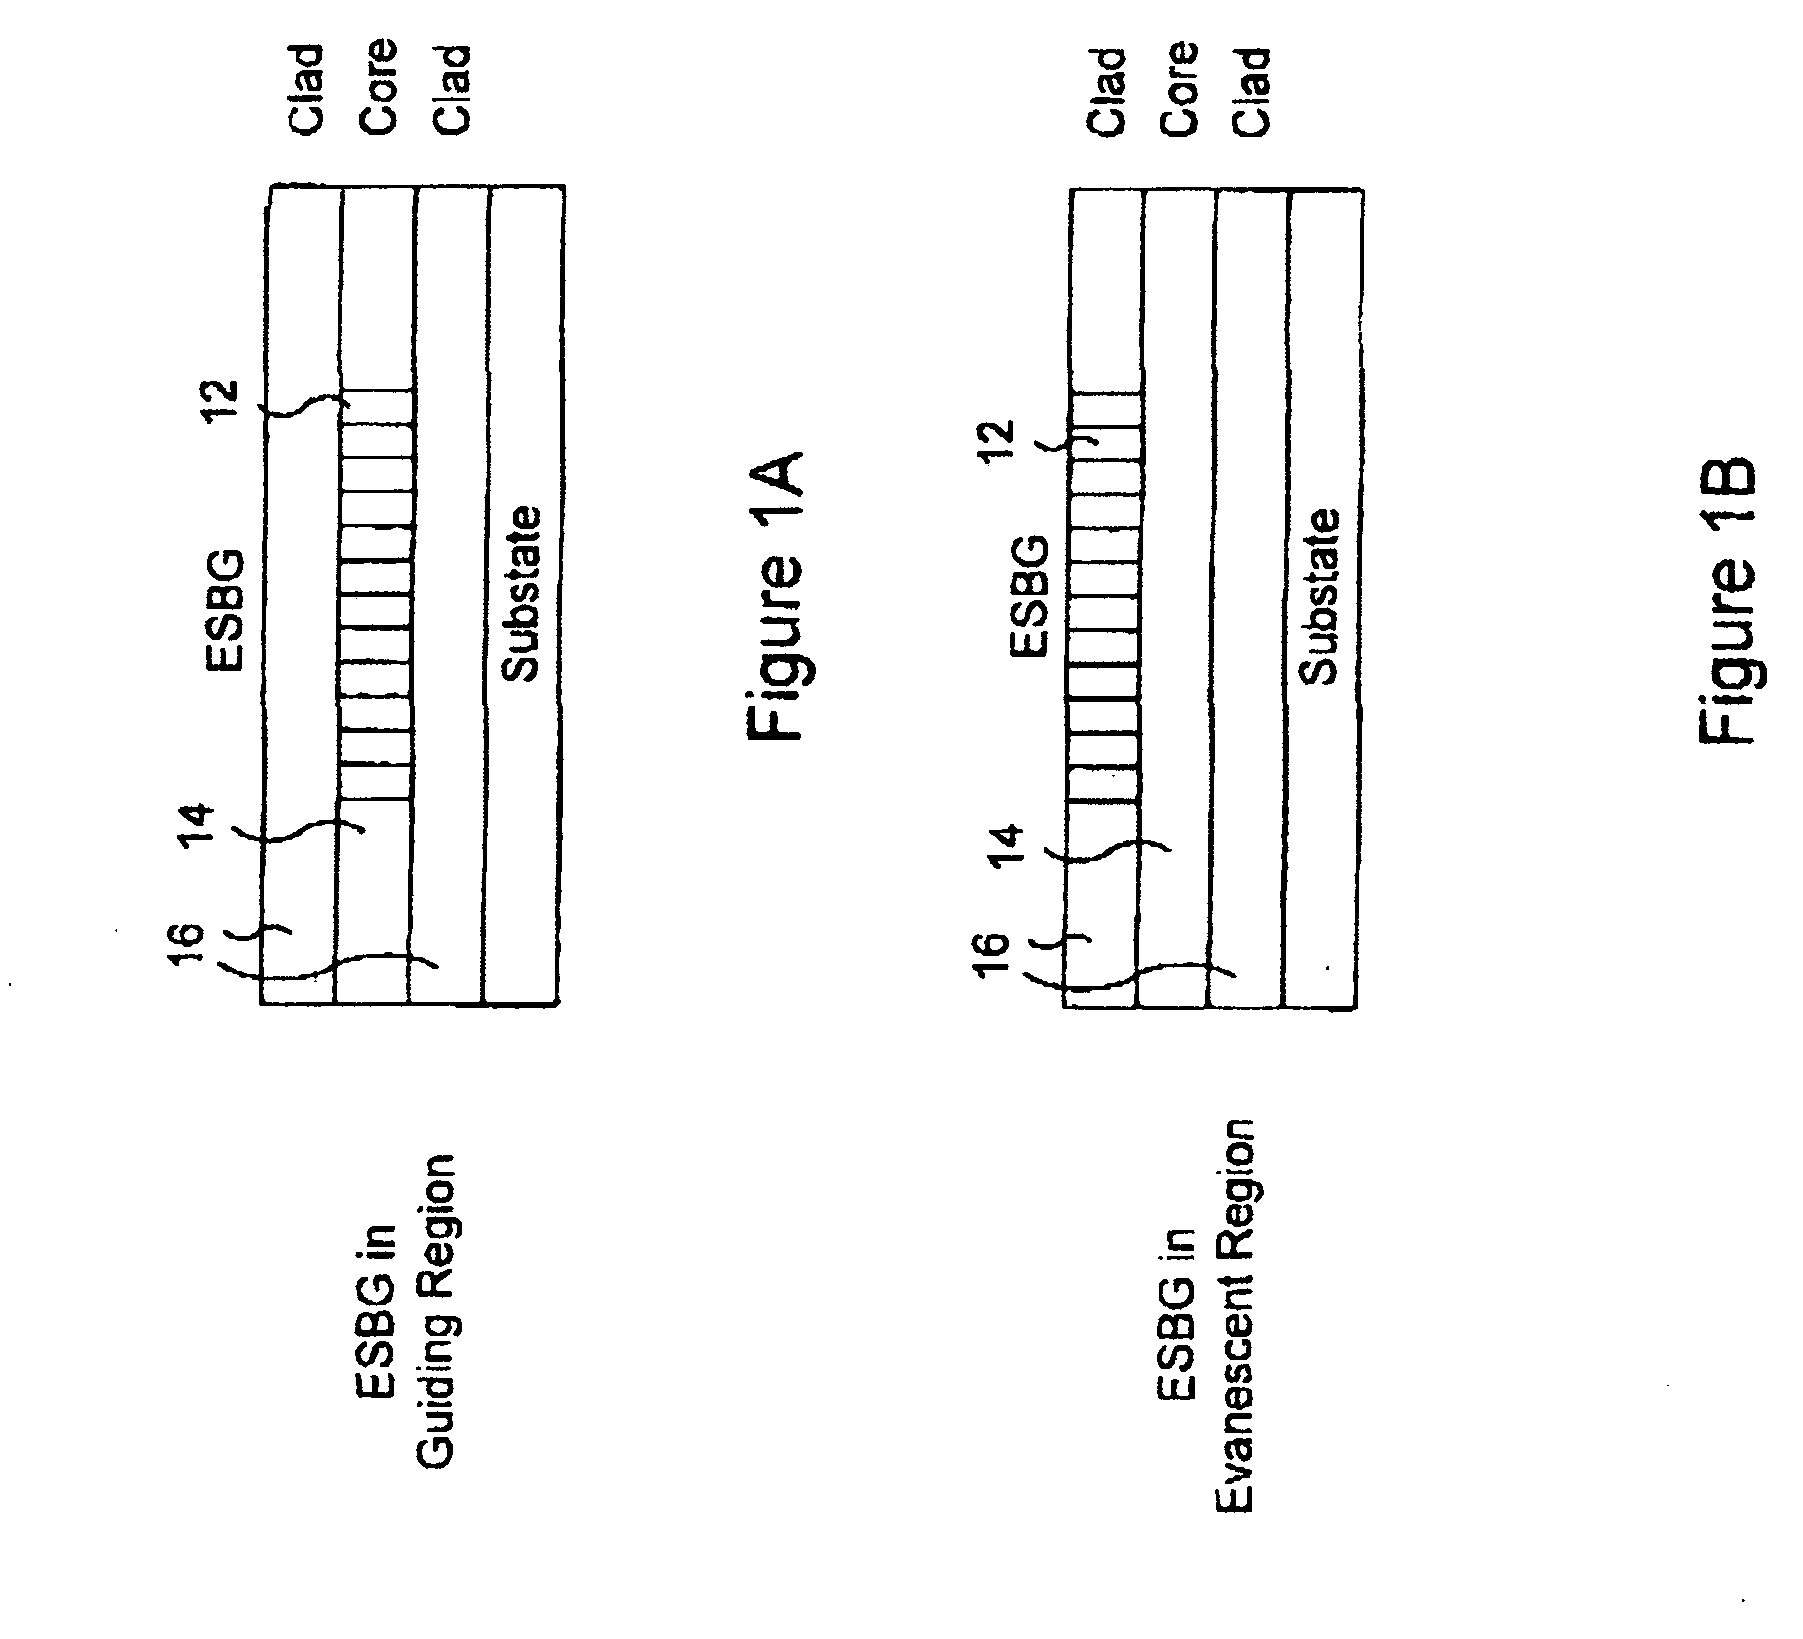 Switchable optical components